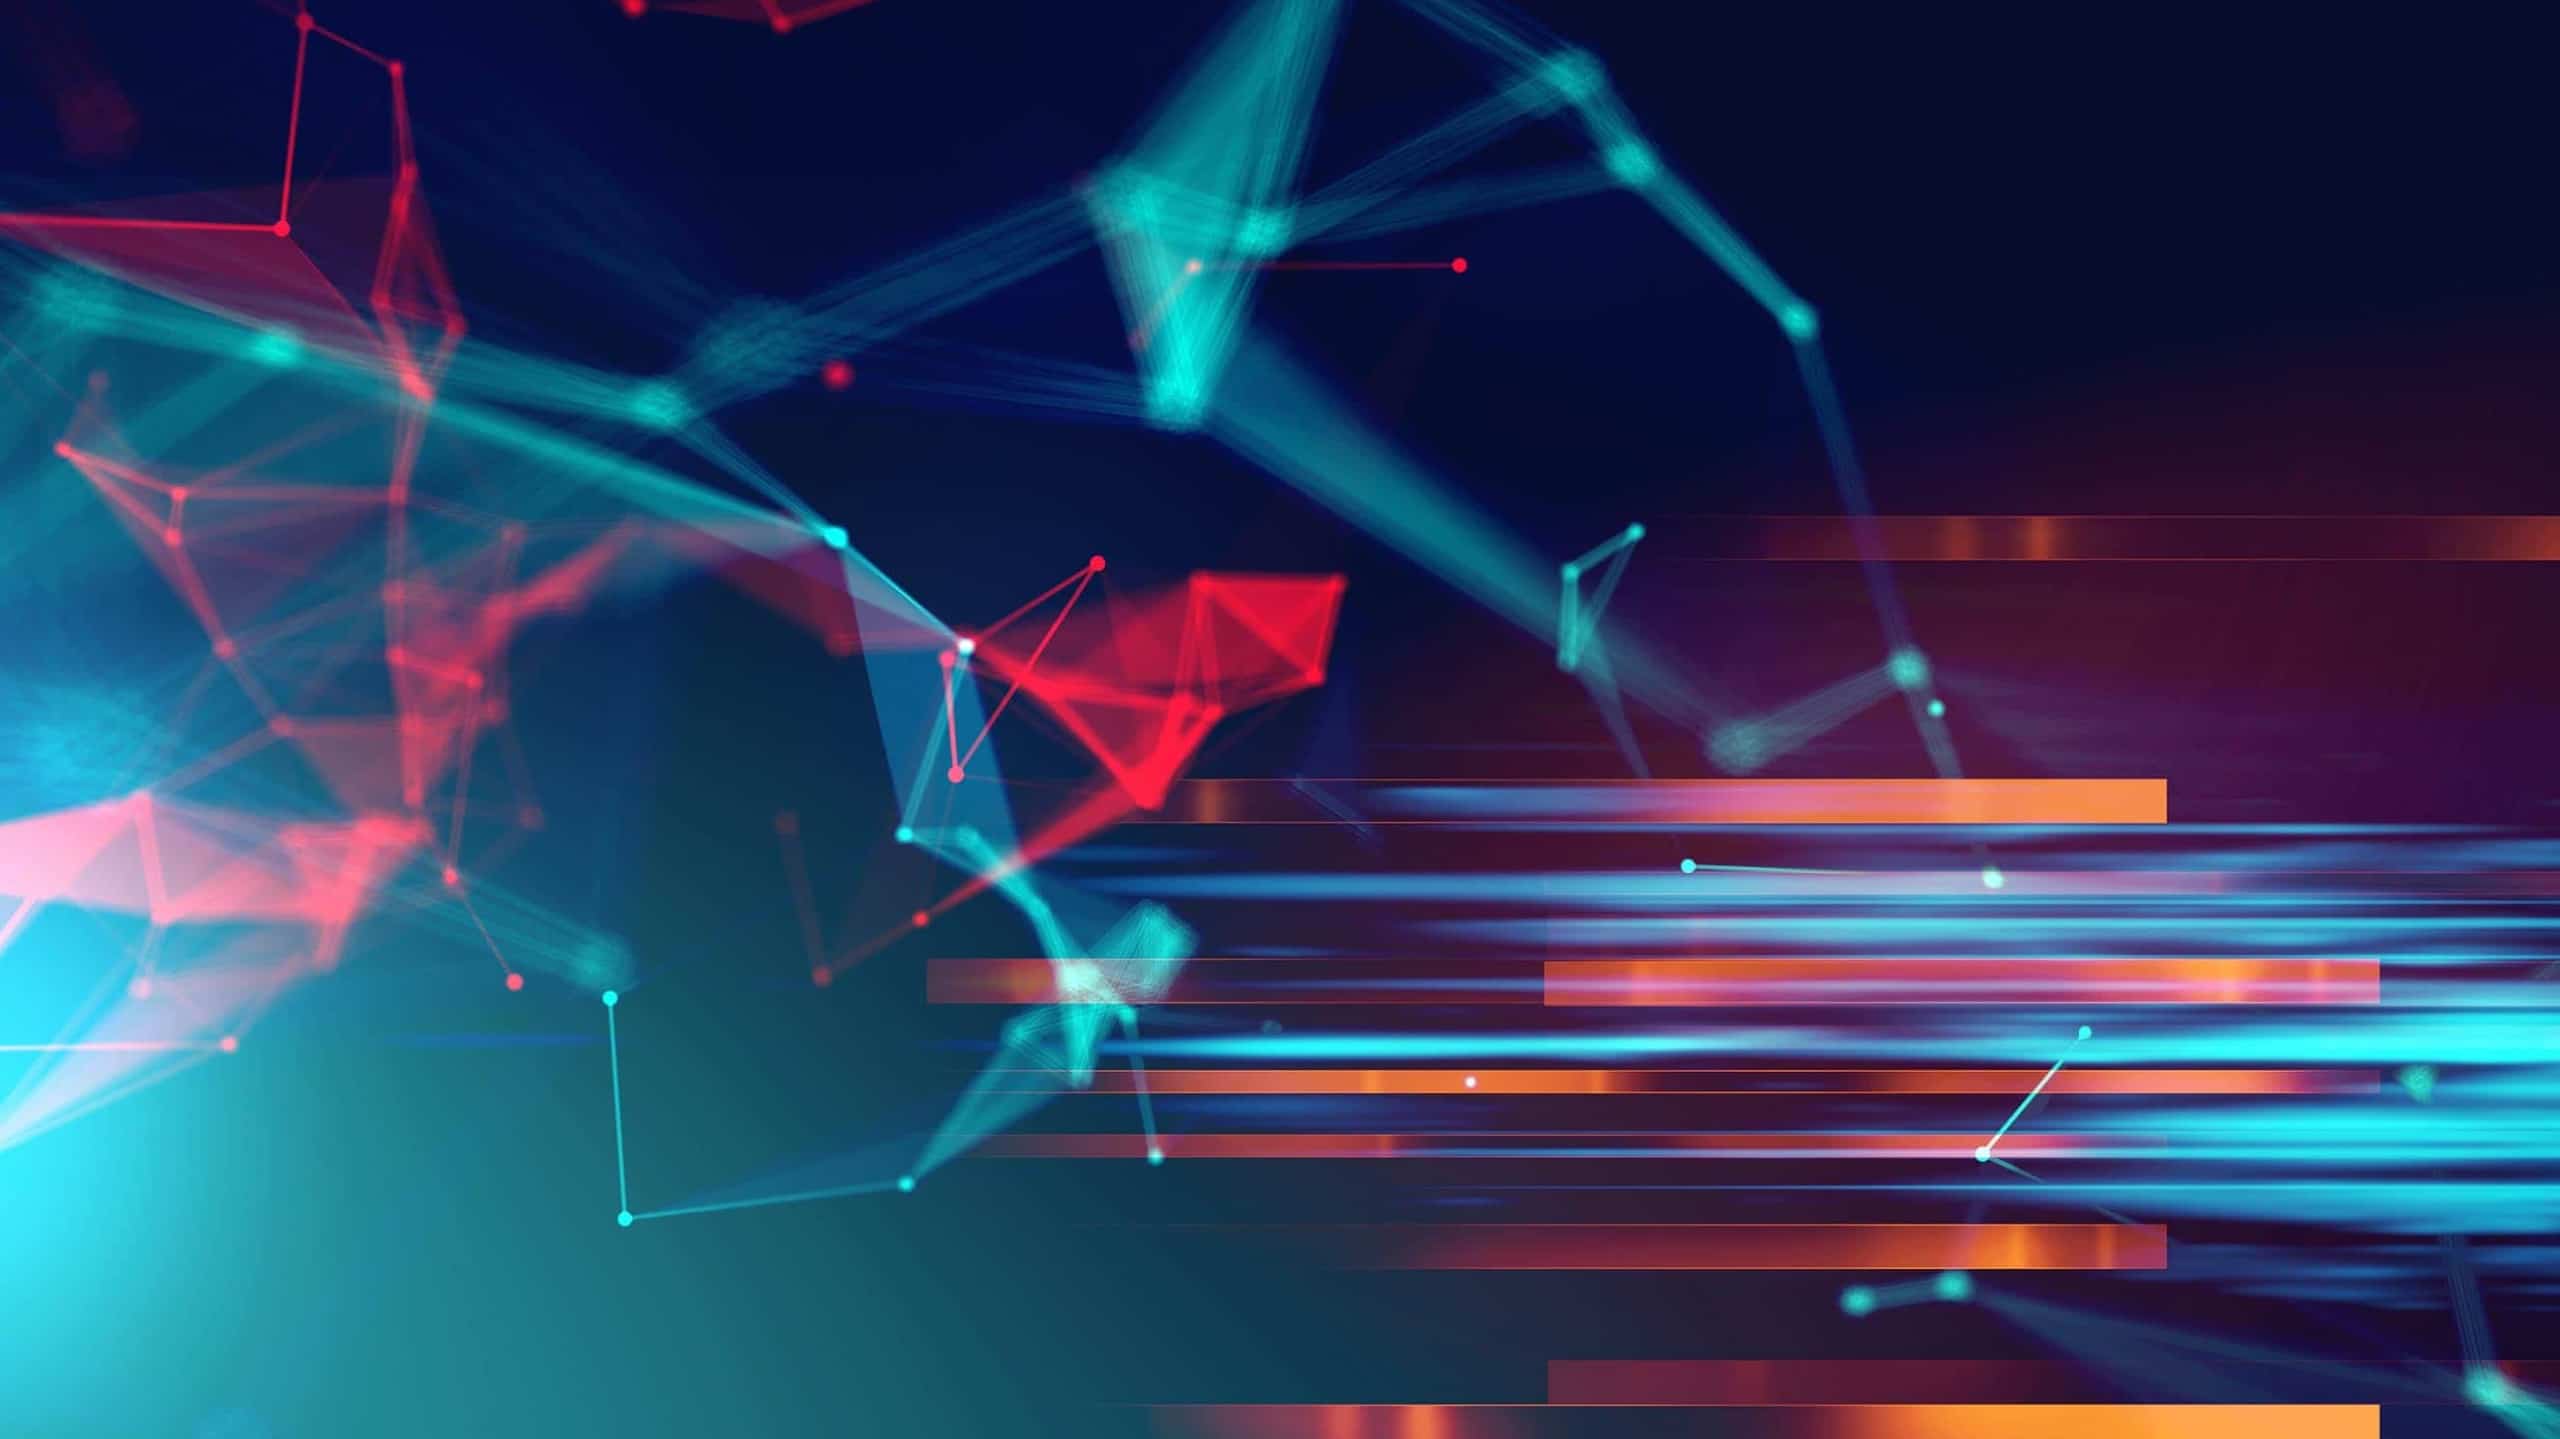 Abstract digital art with vibrant blue and red geometric shapes connected by glowing lines, creating a dynamic sense of motion against a dark background.